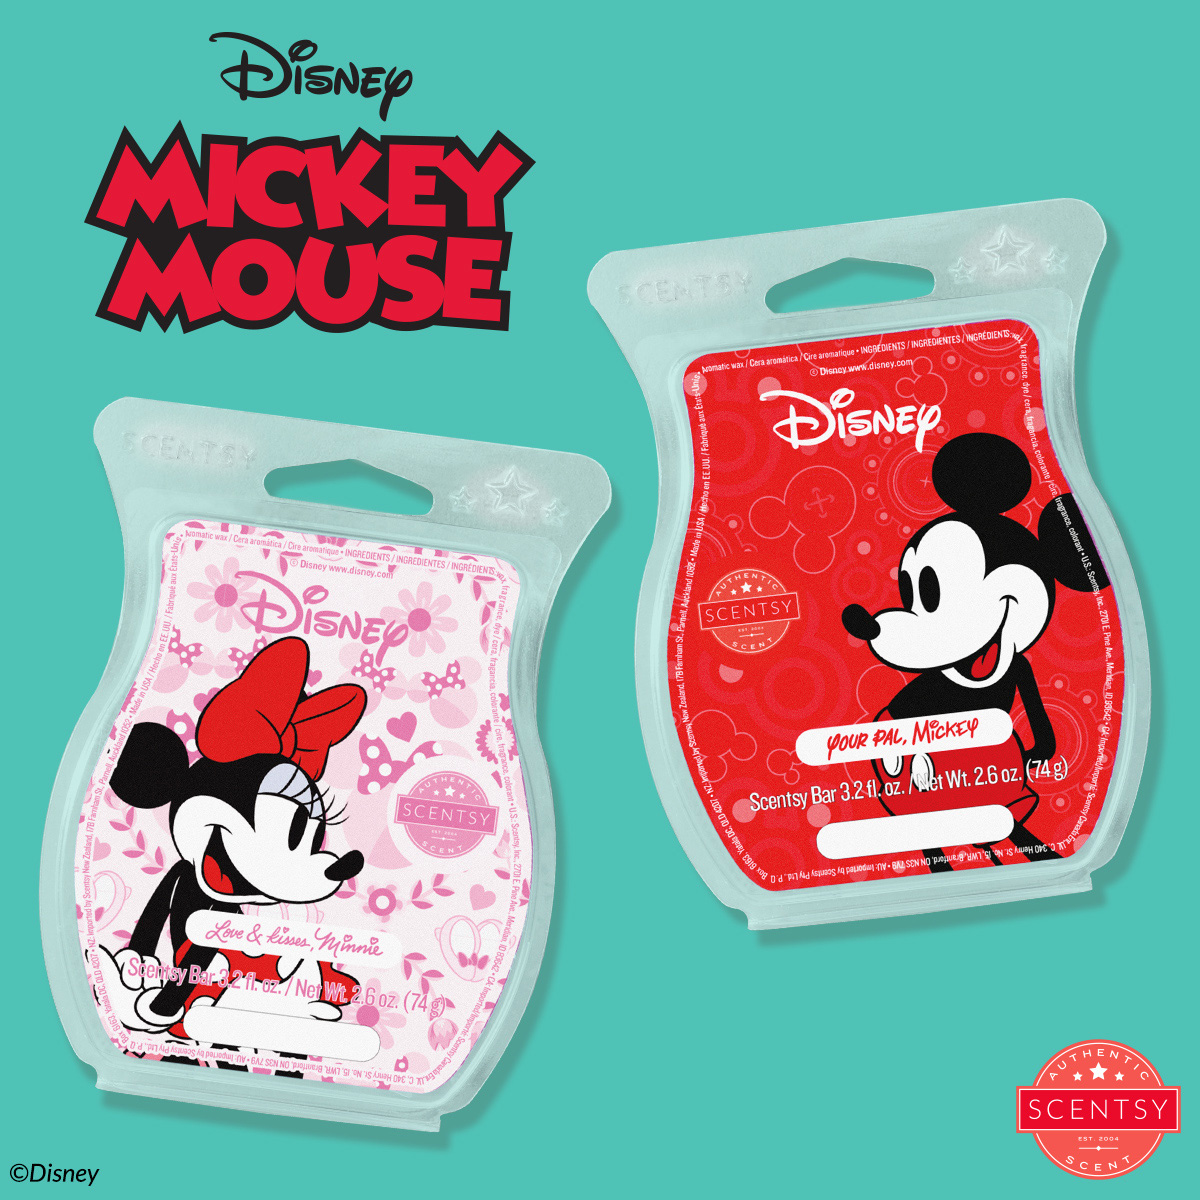 Disney and Scentsy Announce Fragrance Collection Collaboration